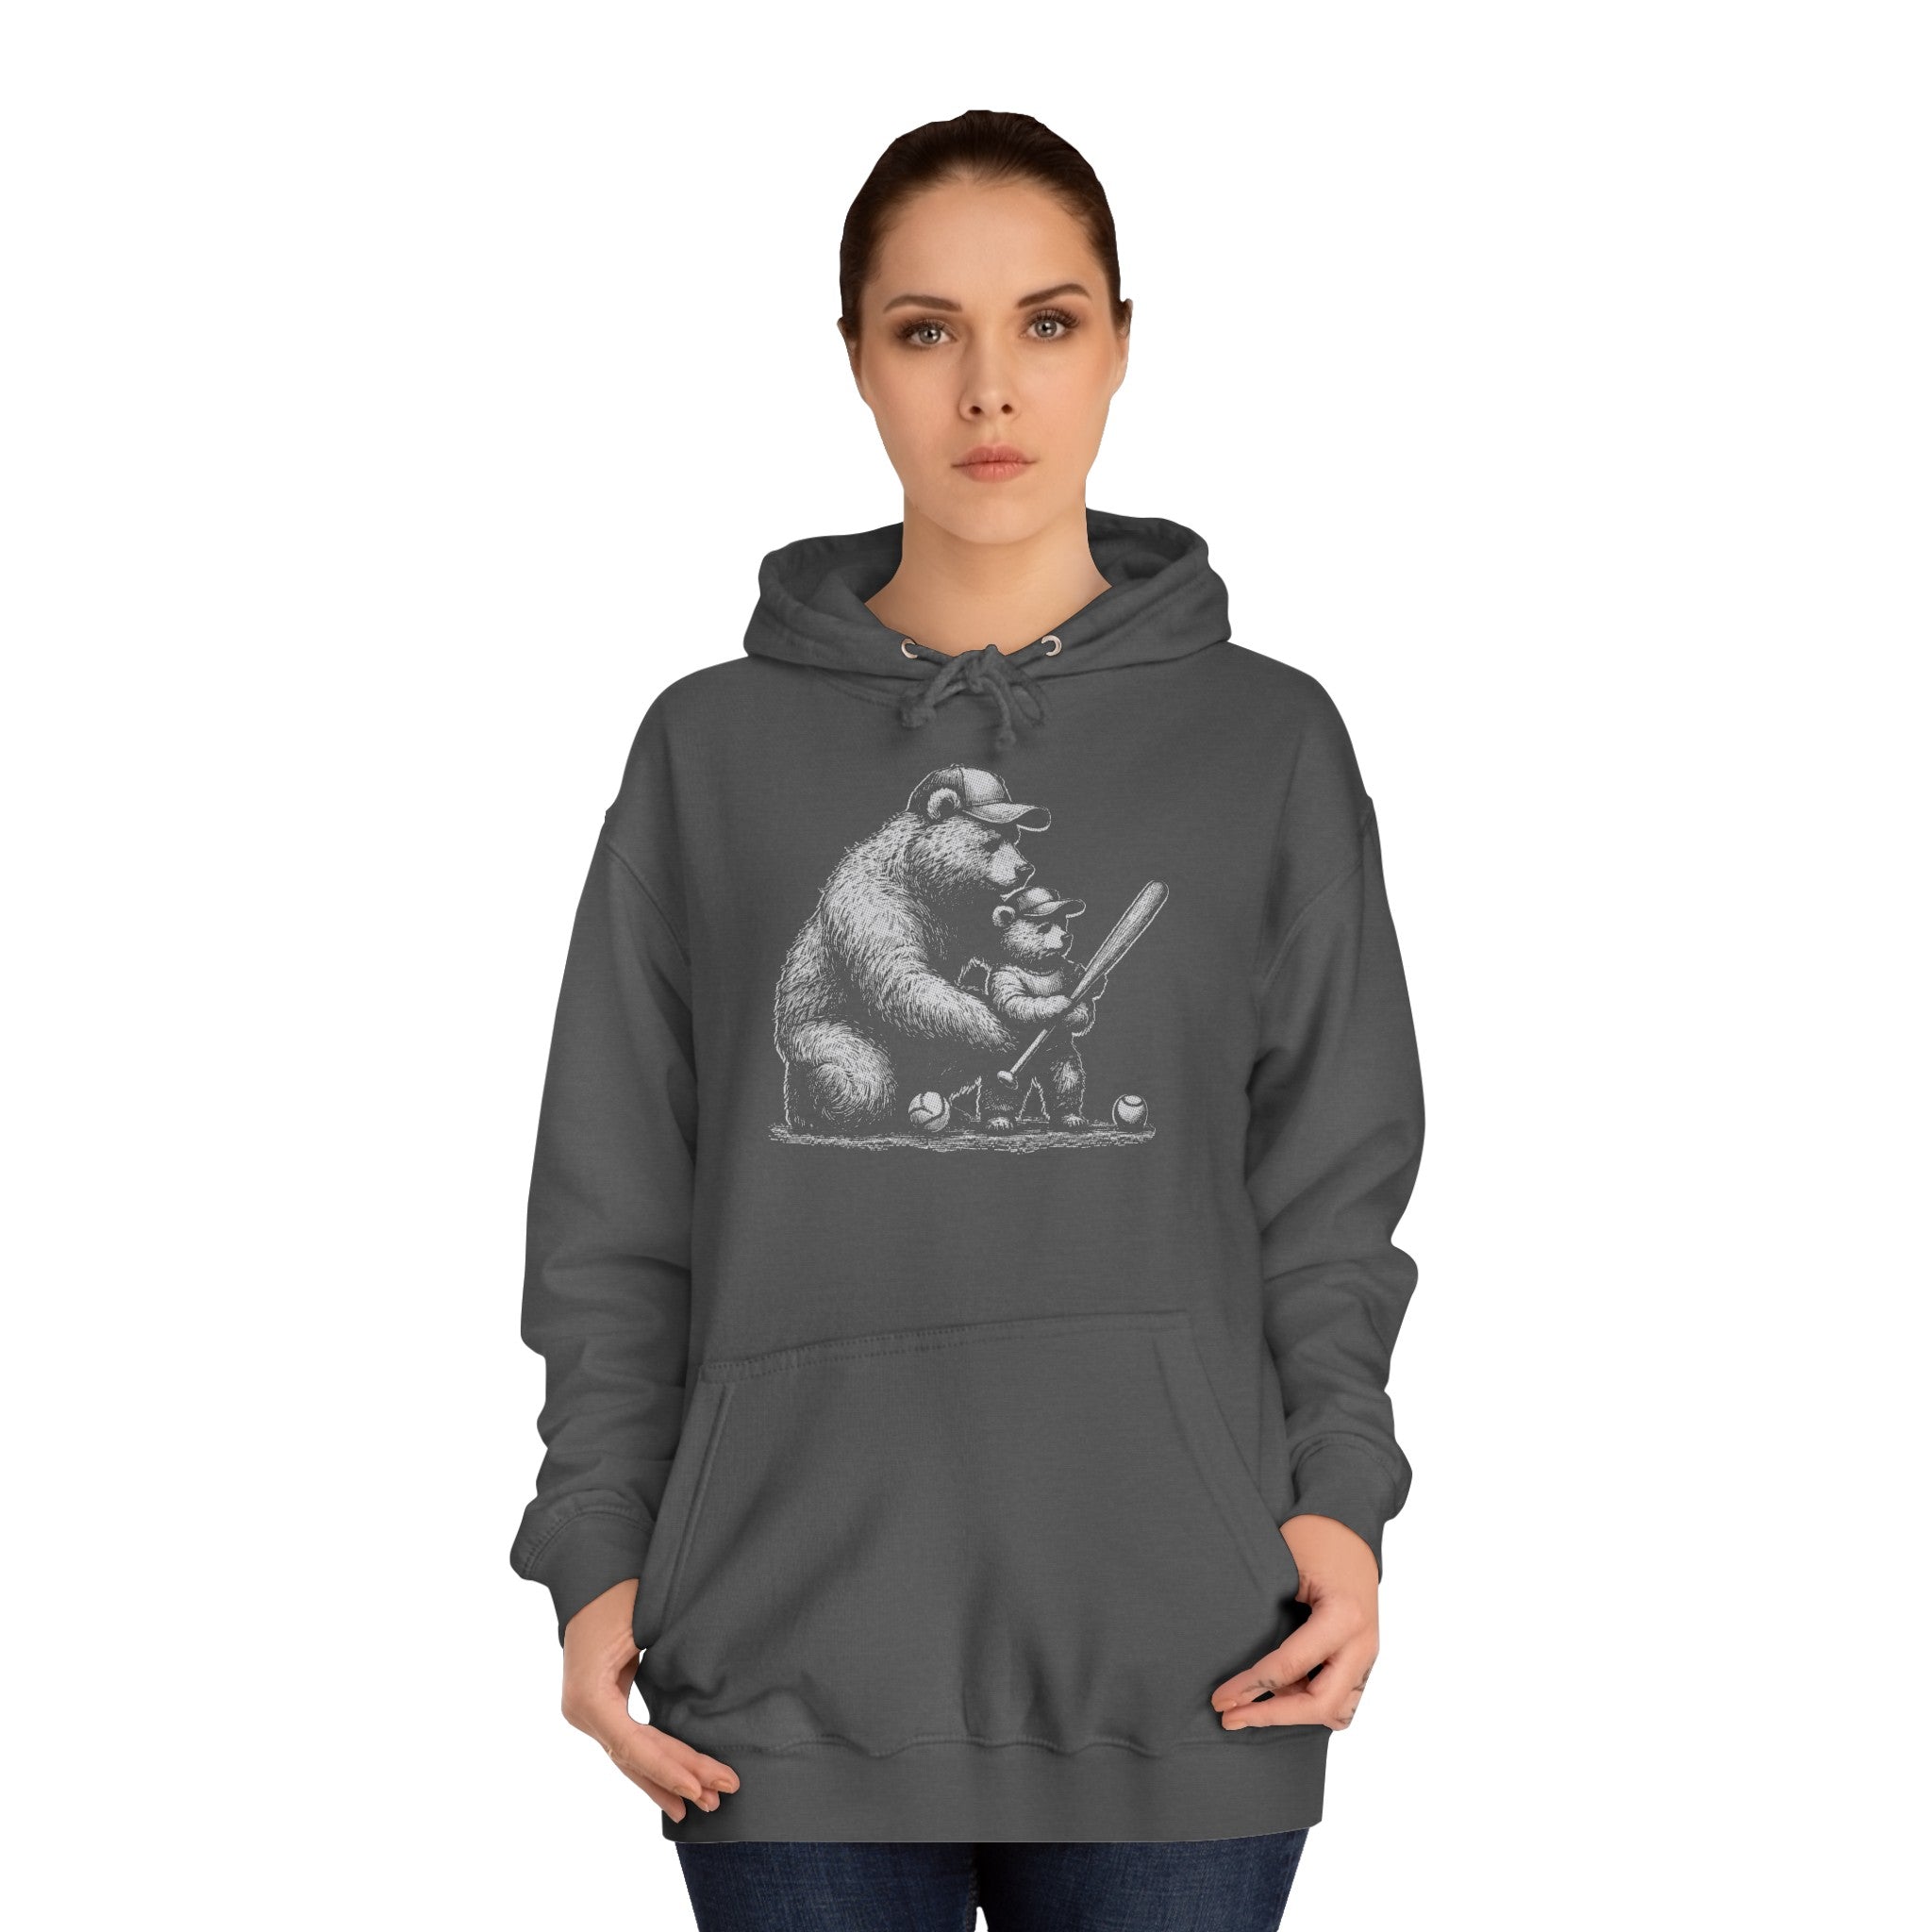 BEAR DAD AND SON Unisex College Hoodie